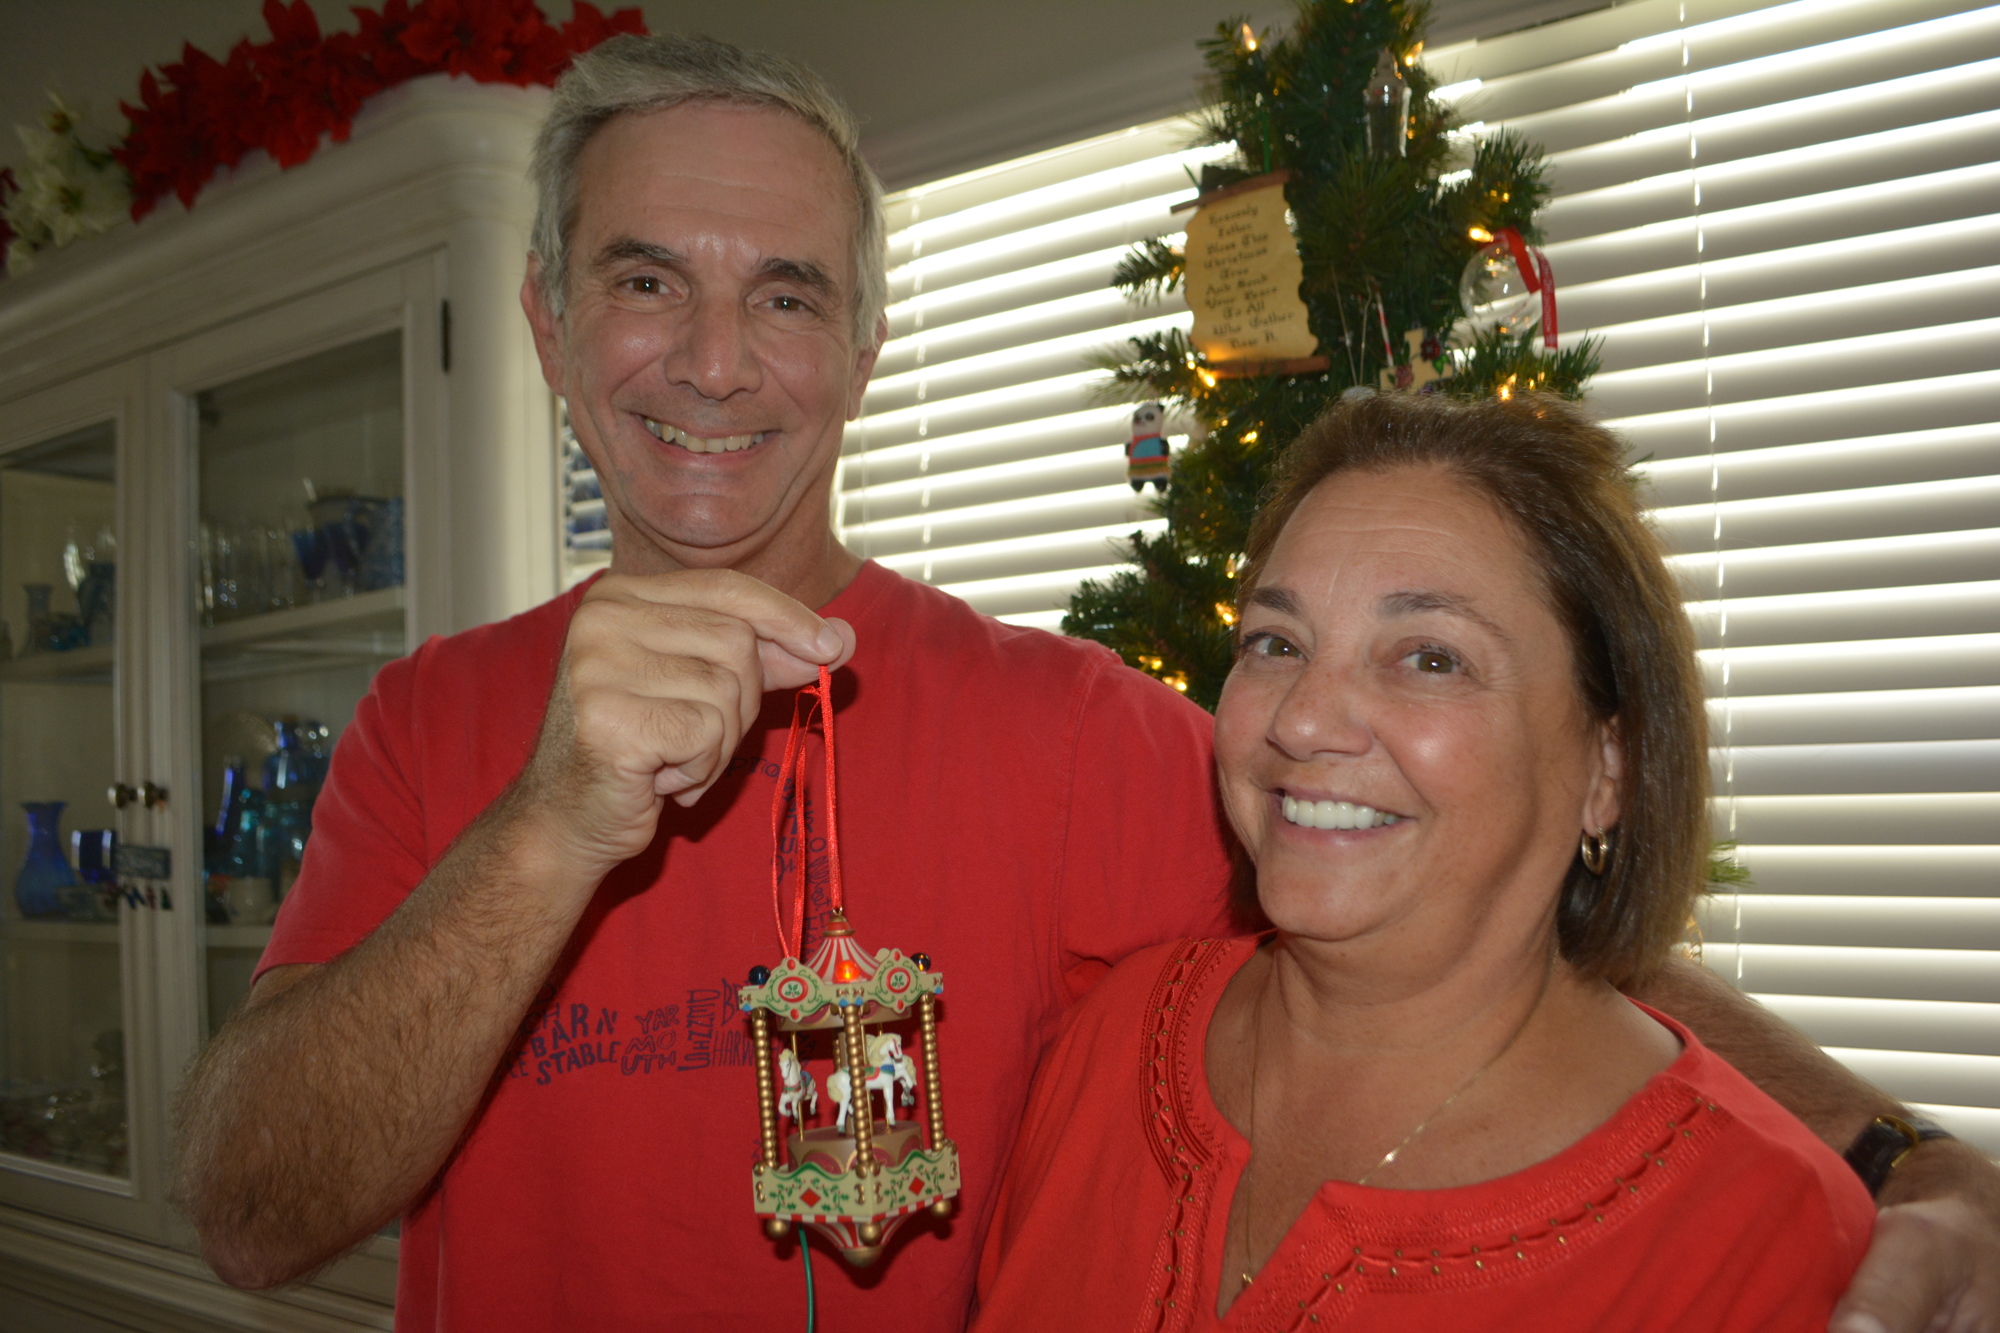 Greg and Denise Tanno of Indigo show off the ornament that represents the carousel where they first met 30 years ago. Photo by Jay Heater